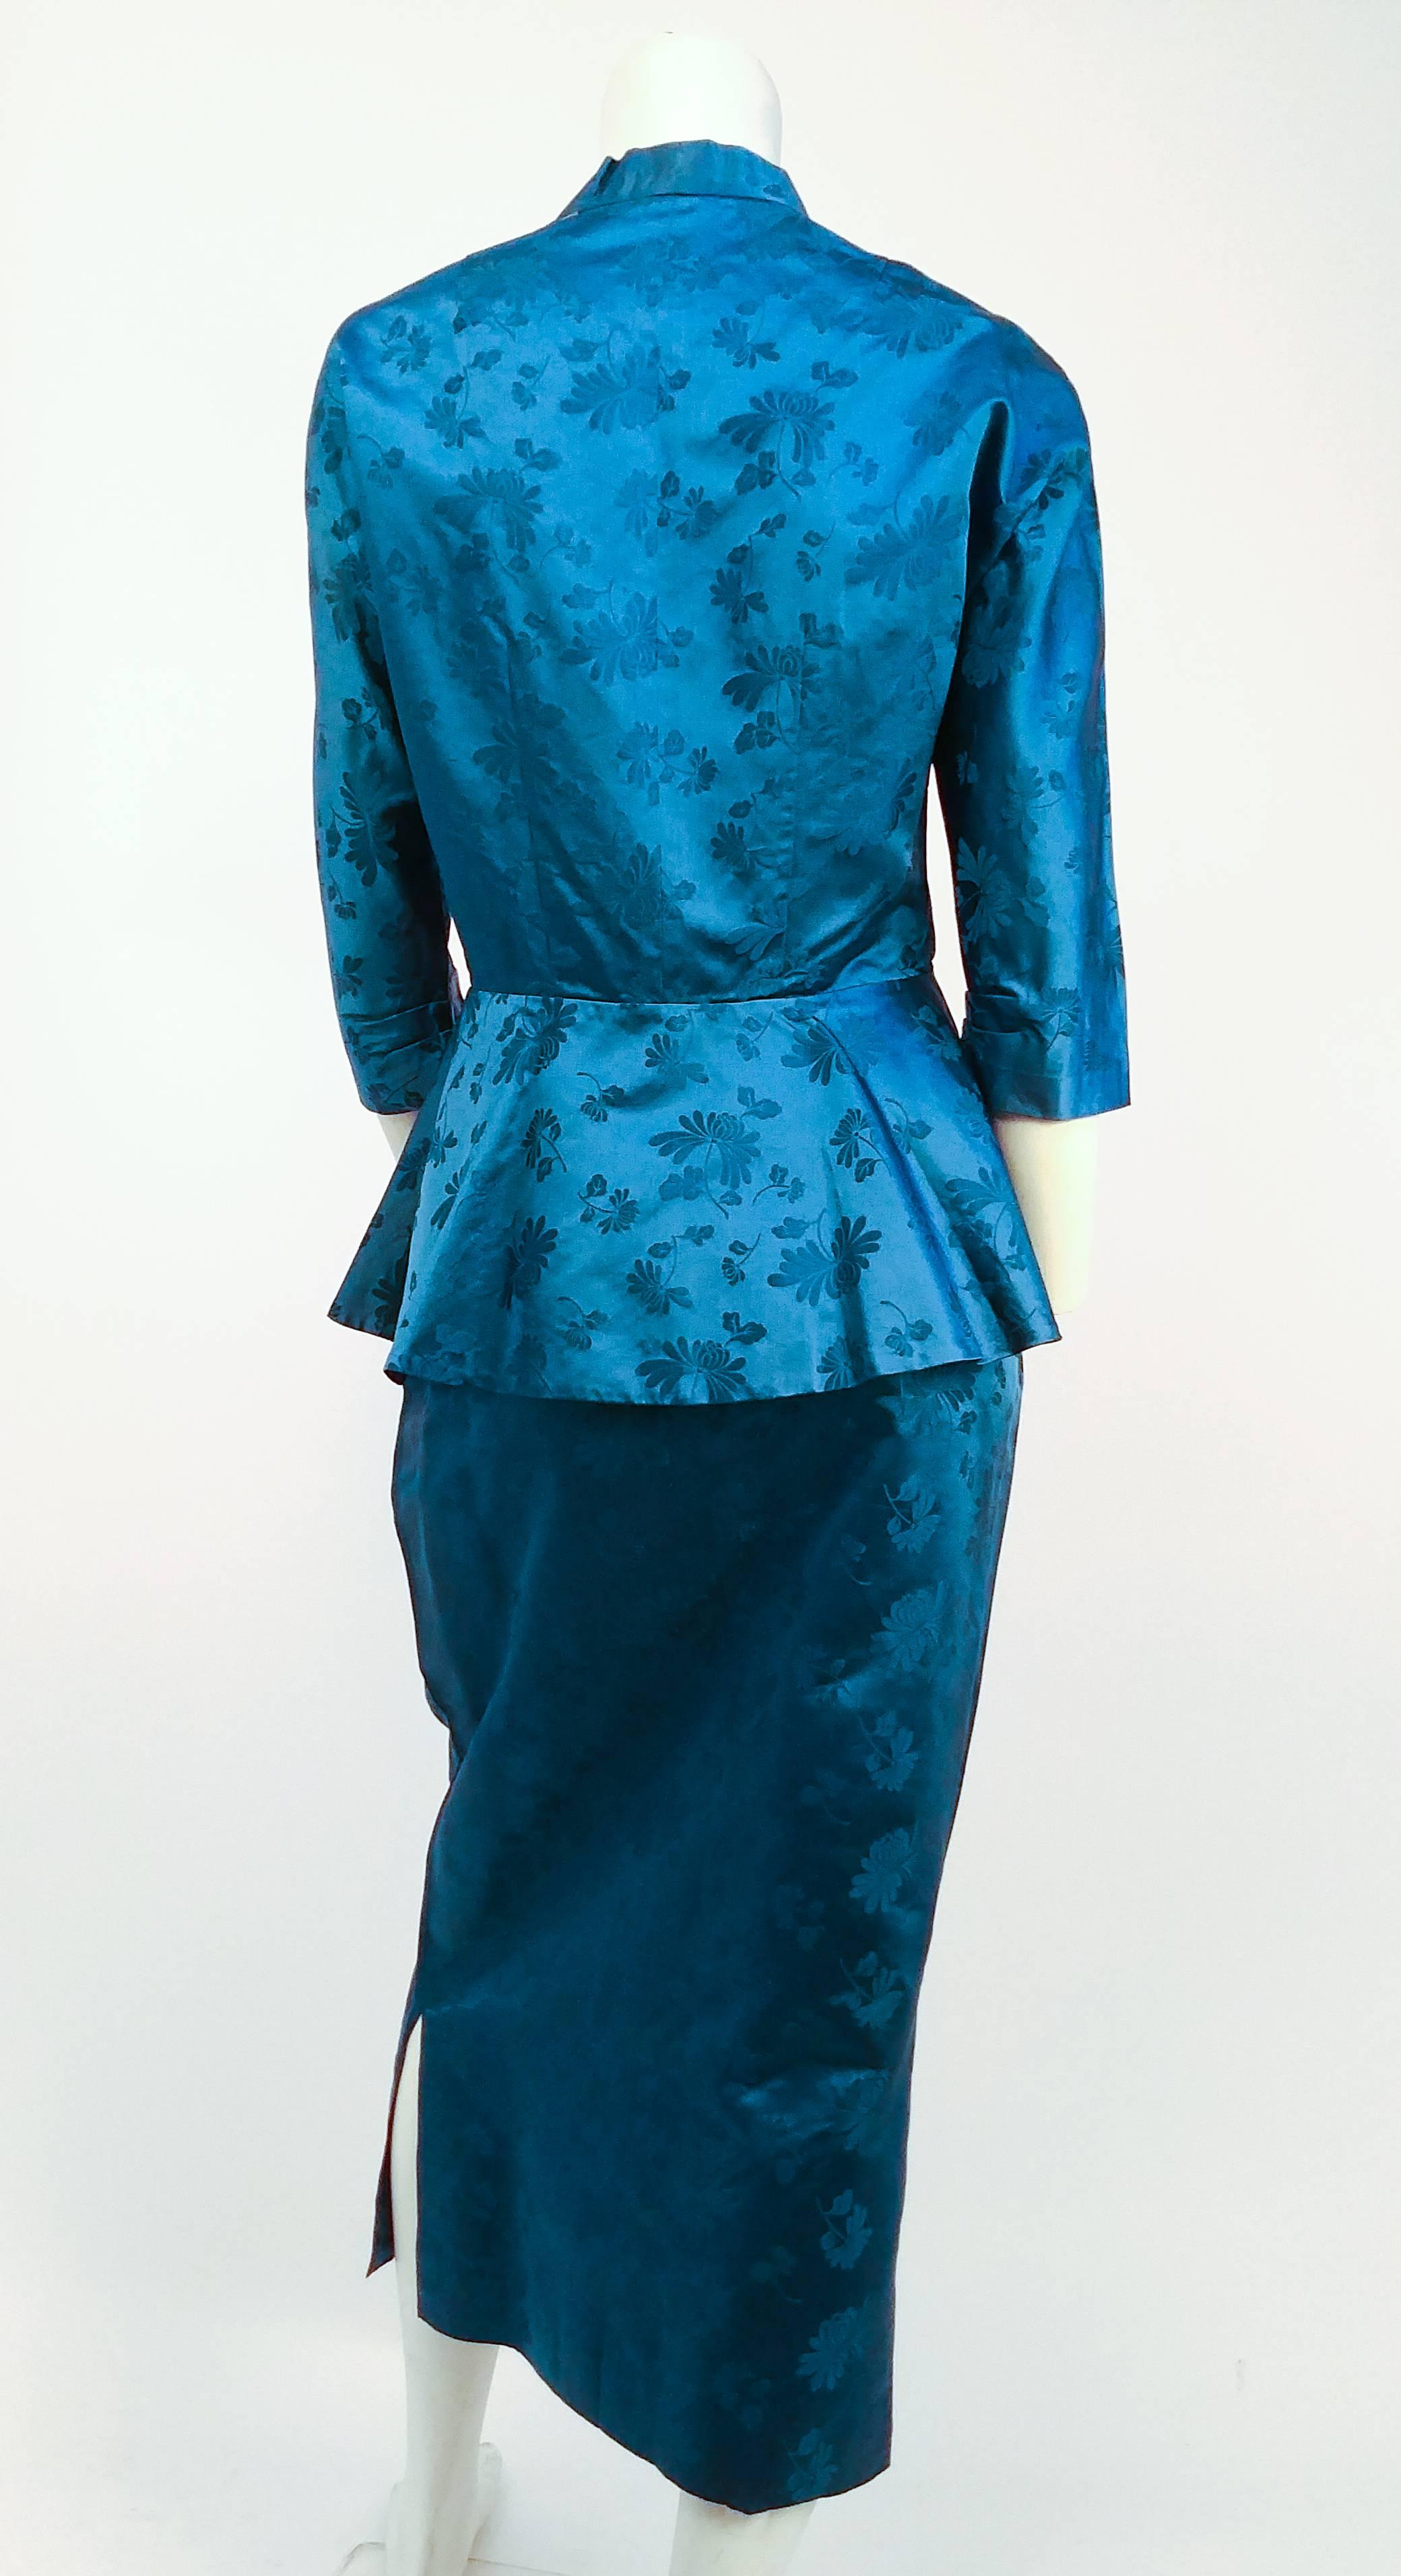 1950s Asian Silk Jacquard Skirt and Jacket Suit Set. Top fastens with snaps at neckline and frog at the waist. Flares at waist for classic peplum silhouette. Skirt has been altered to be longer, with additional contrast fabric added in between